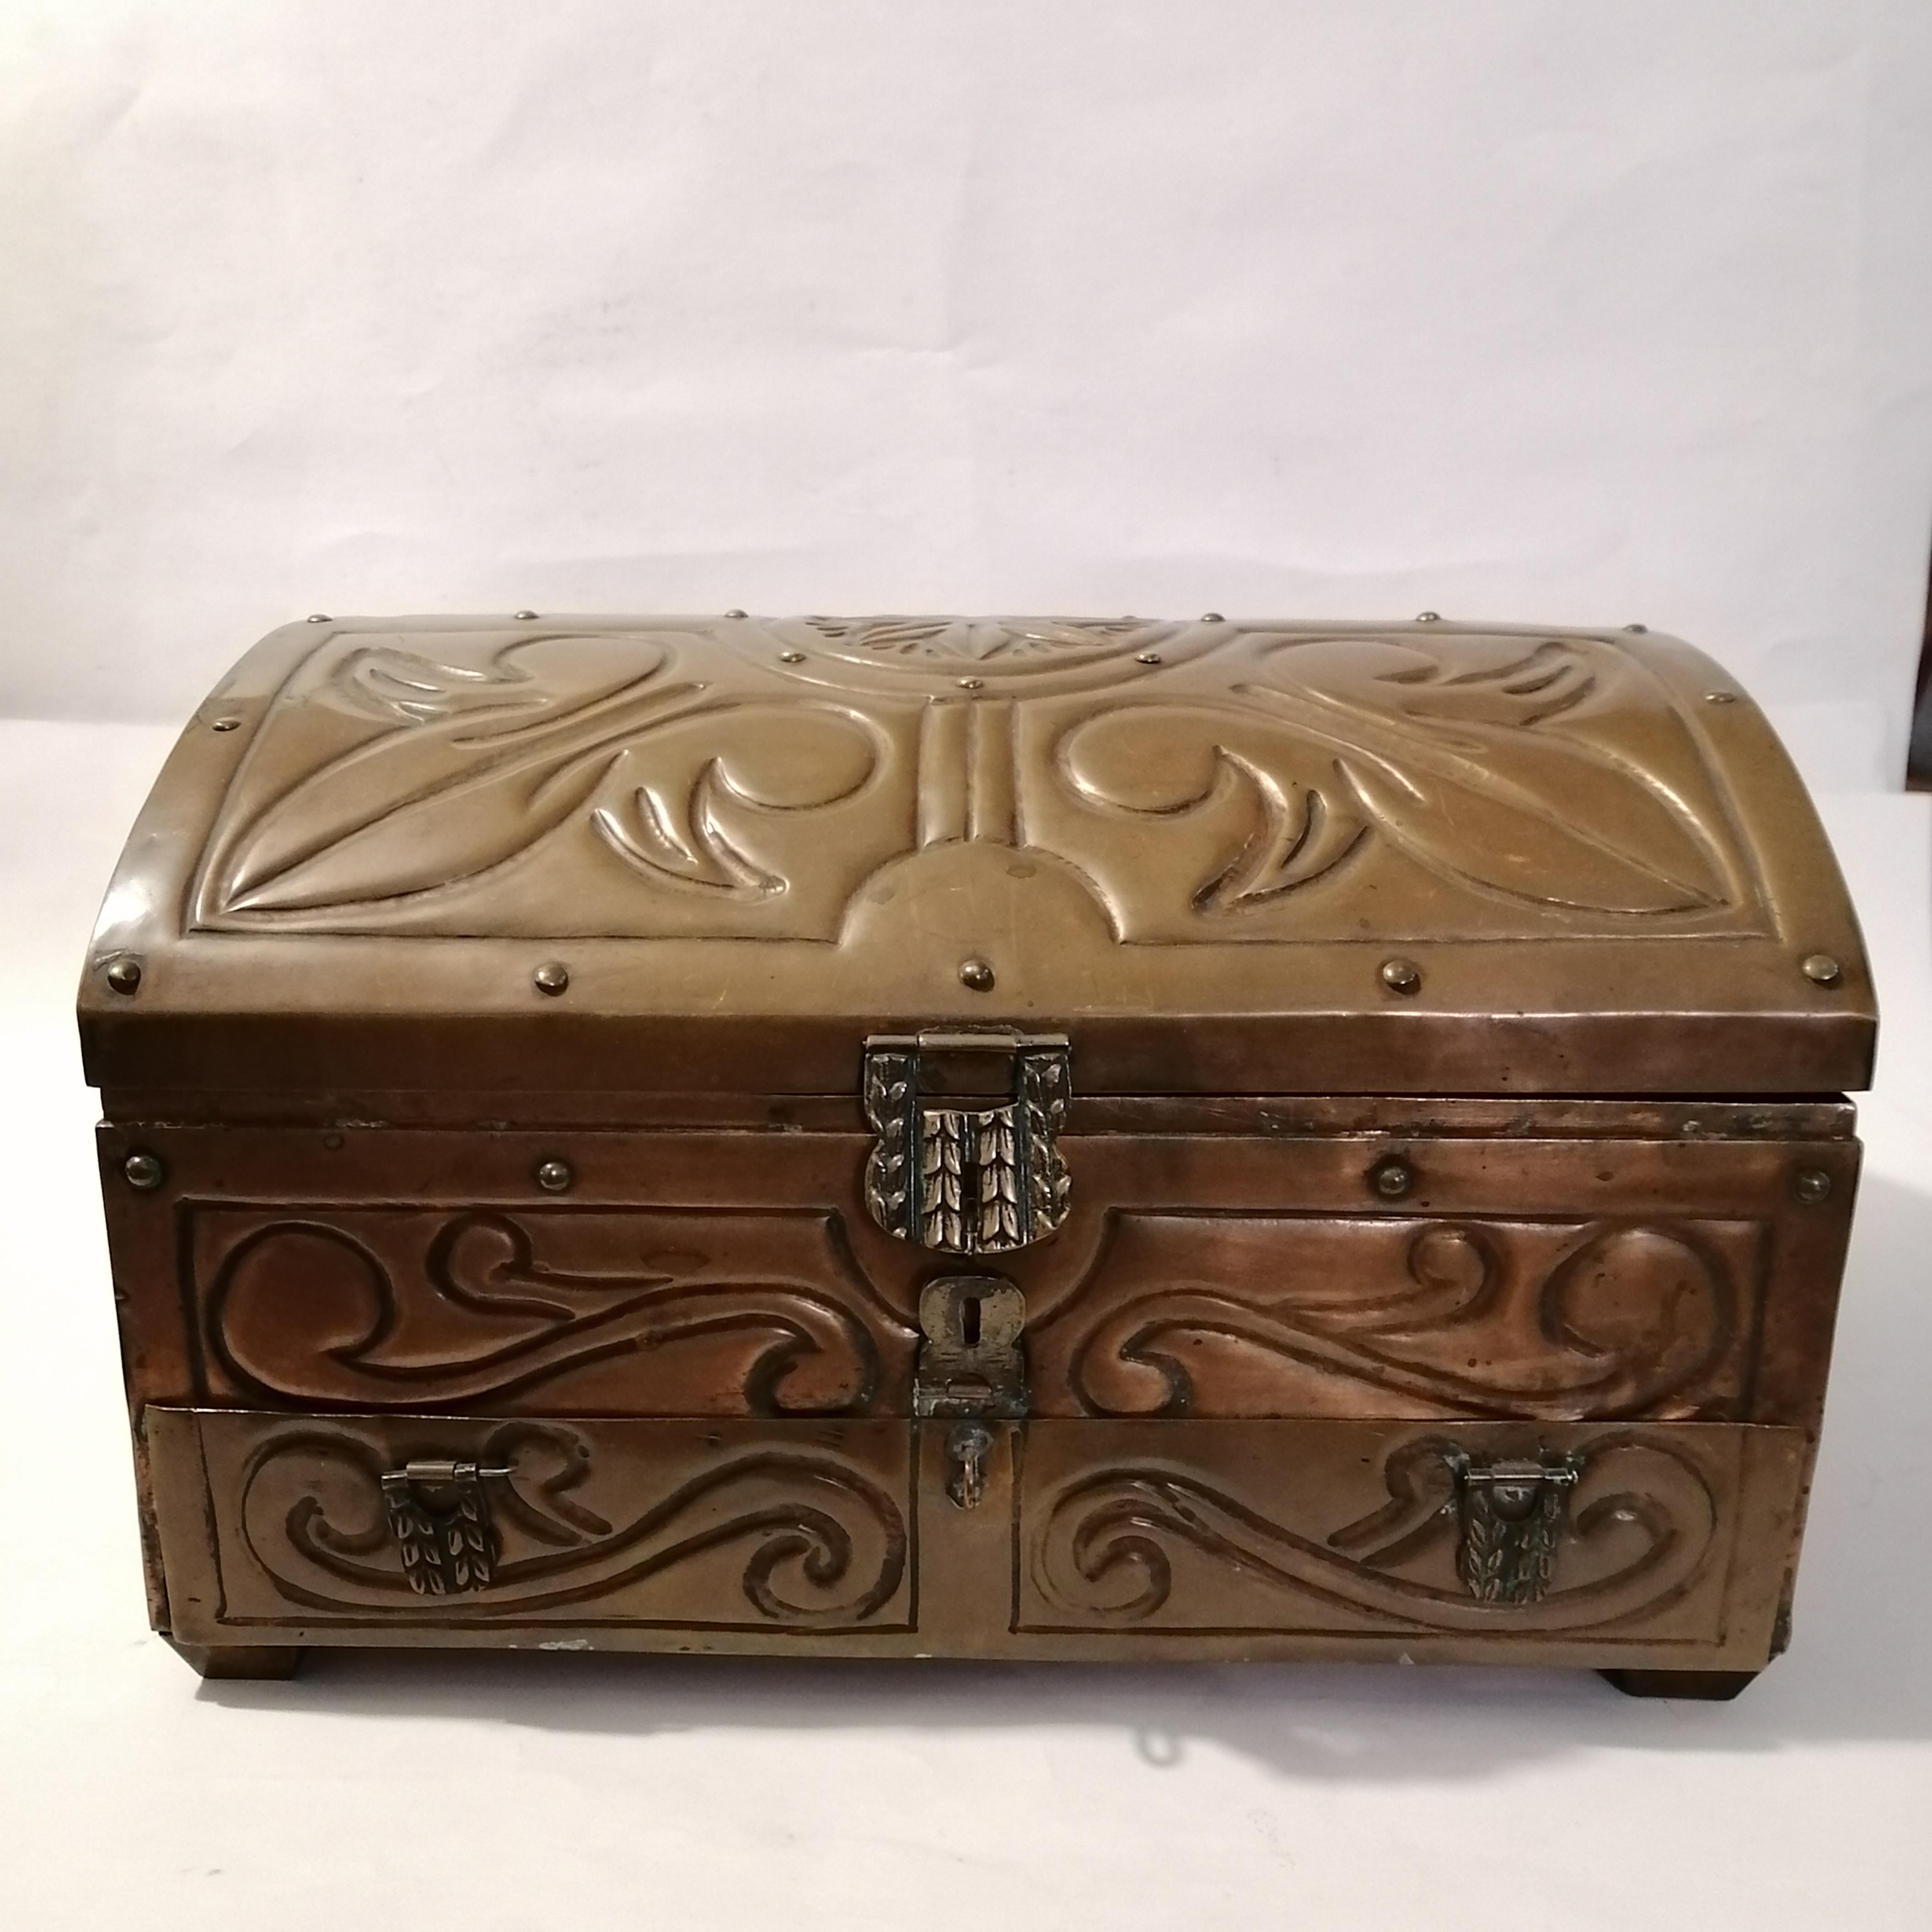 A nice Mexican Mid-Century Modern copper sheet jewel box in shape of a chest. The embossed designs show acanthus leaves and a rosette.

The jewel box's interior and removable tray show its old original green velvet dressings, which are still in a